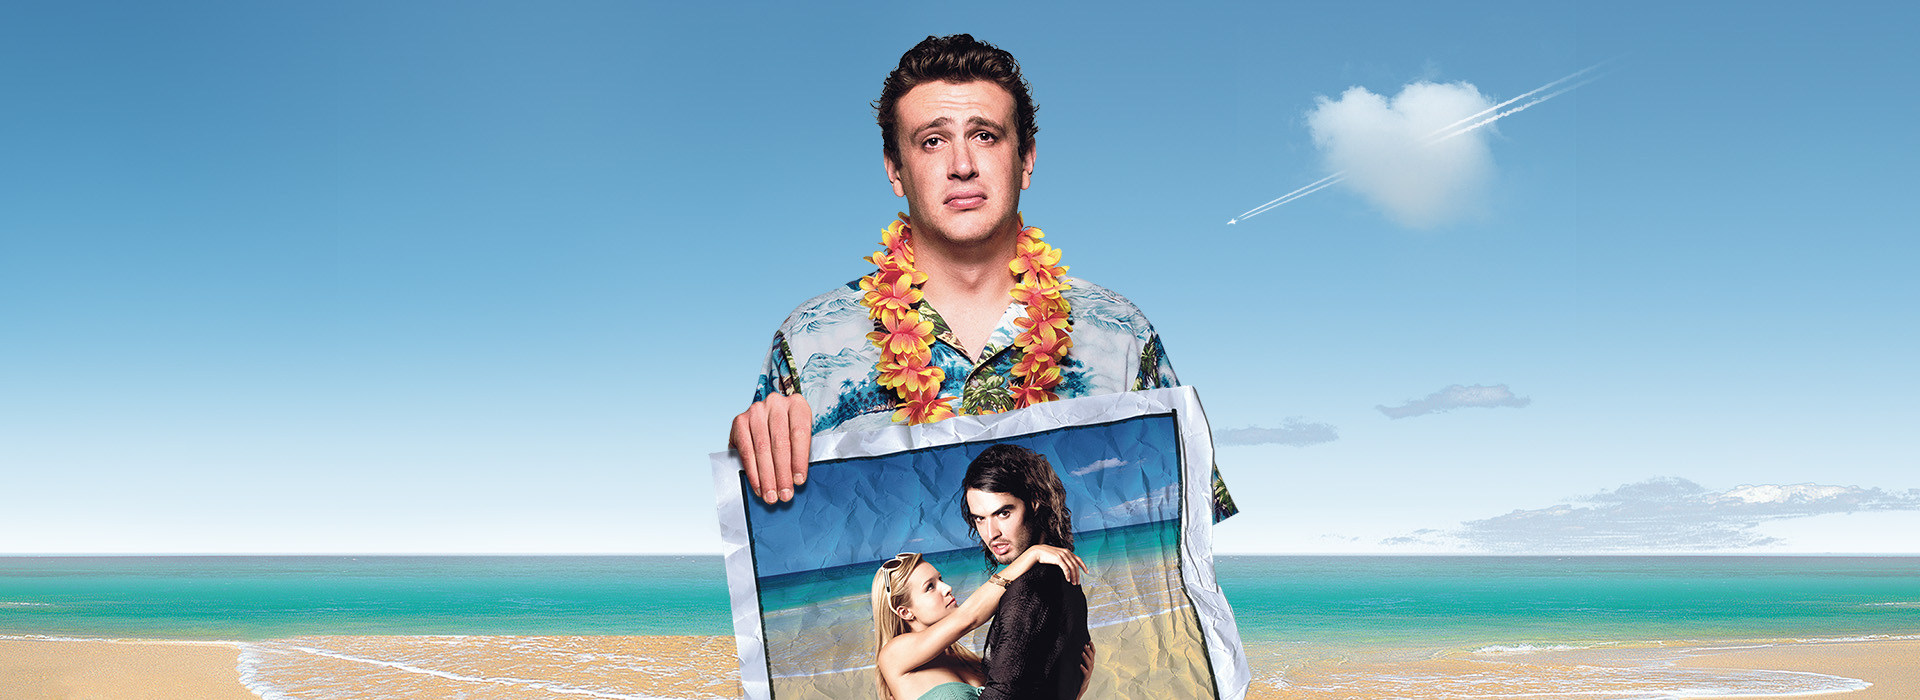 Movie poster Forgetting Sarah Marshall